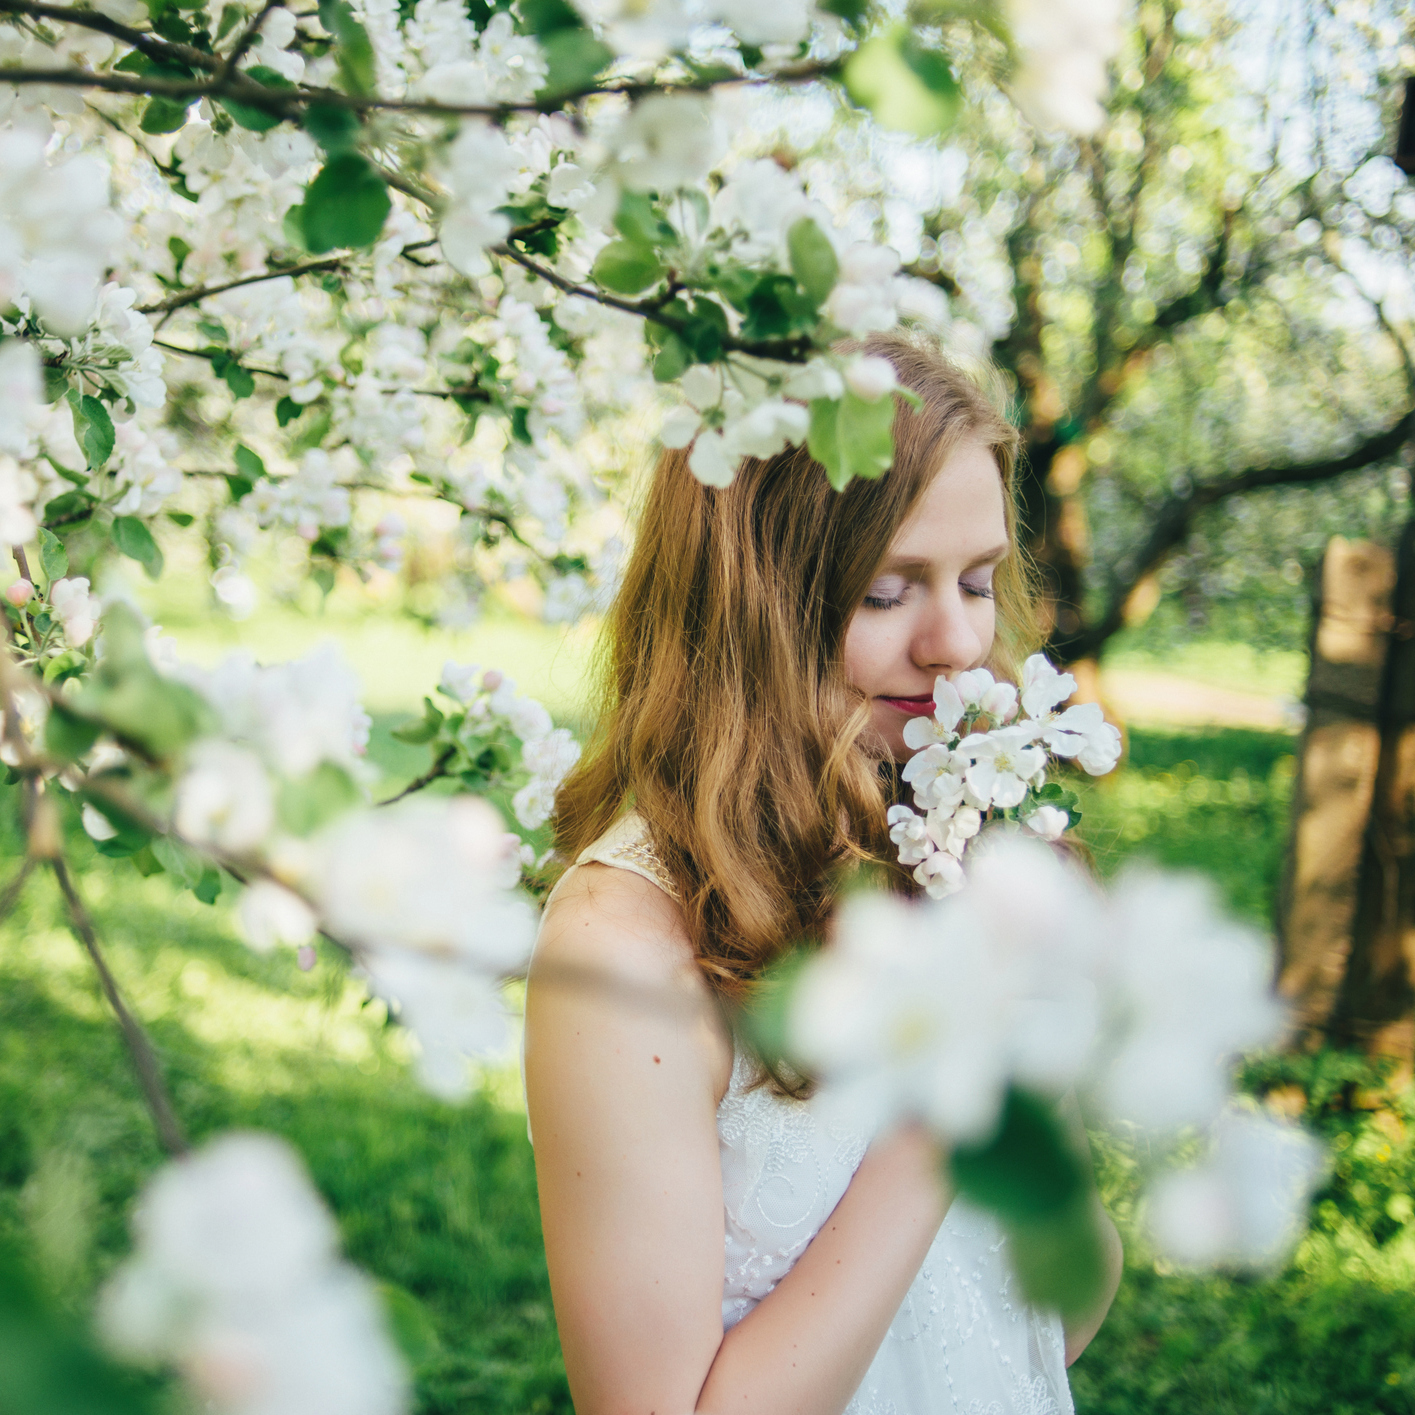 A girl in a white dress, in an apple orchard, smelling flowers.